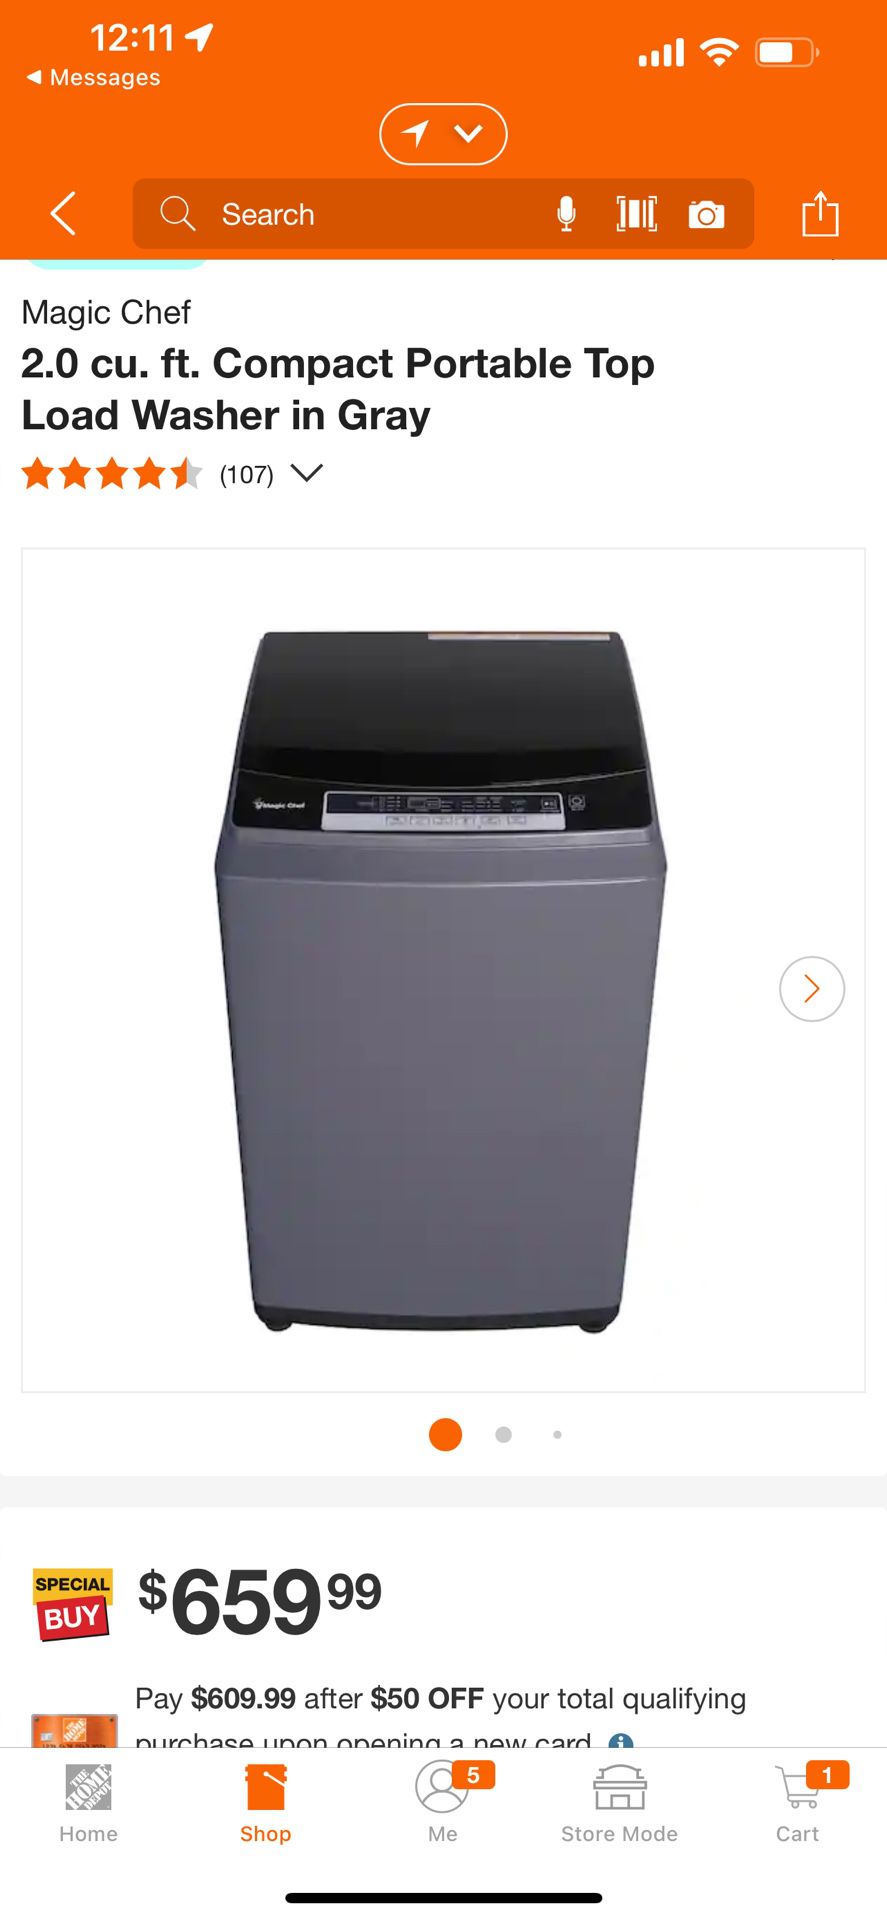 Magic Chef 2.0 cu. ft. Compact Portable Top Load Washer in Gray